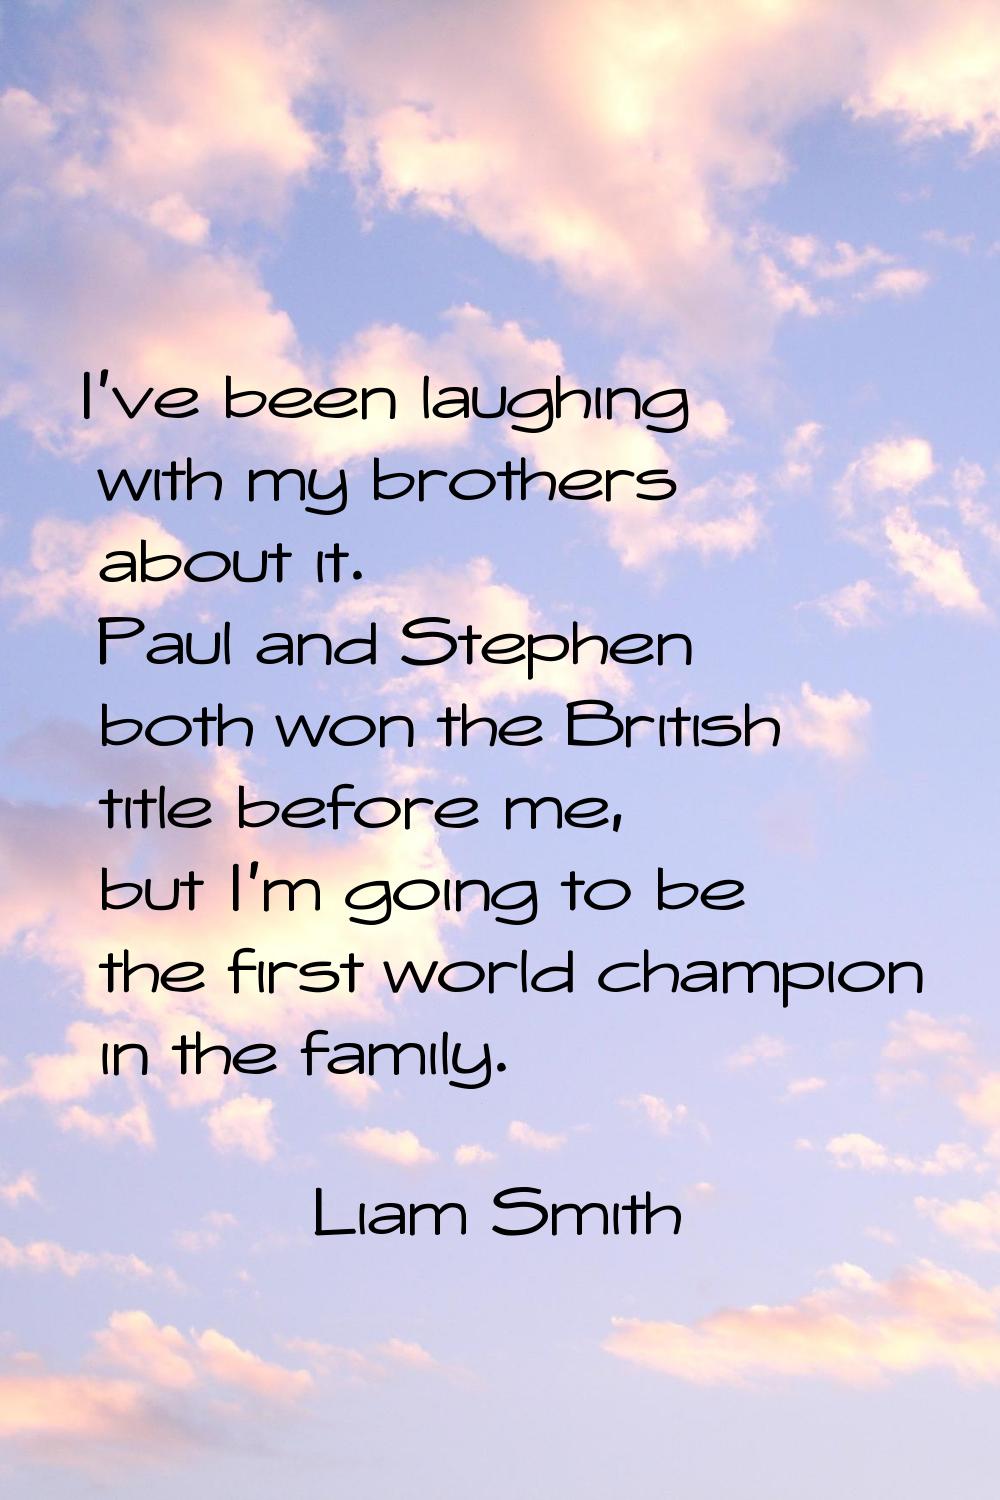 I've been laughing with my brothers about it. Paul and Stephen both won the British title before me